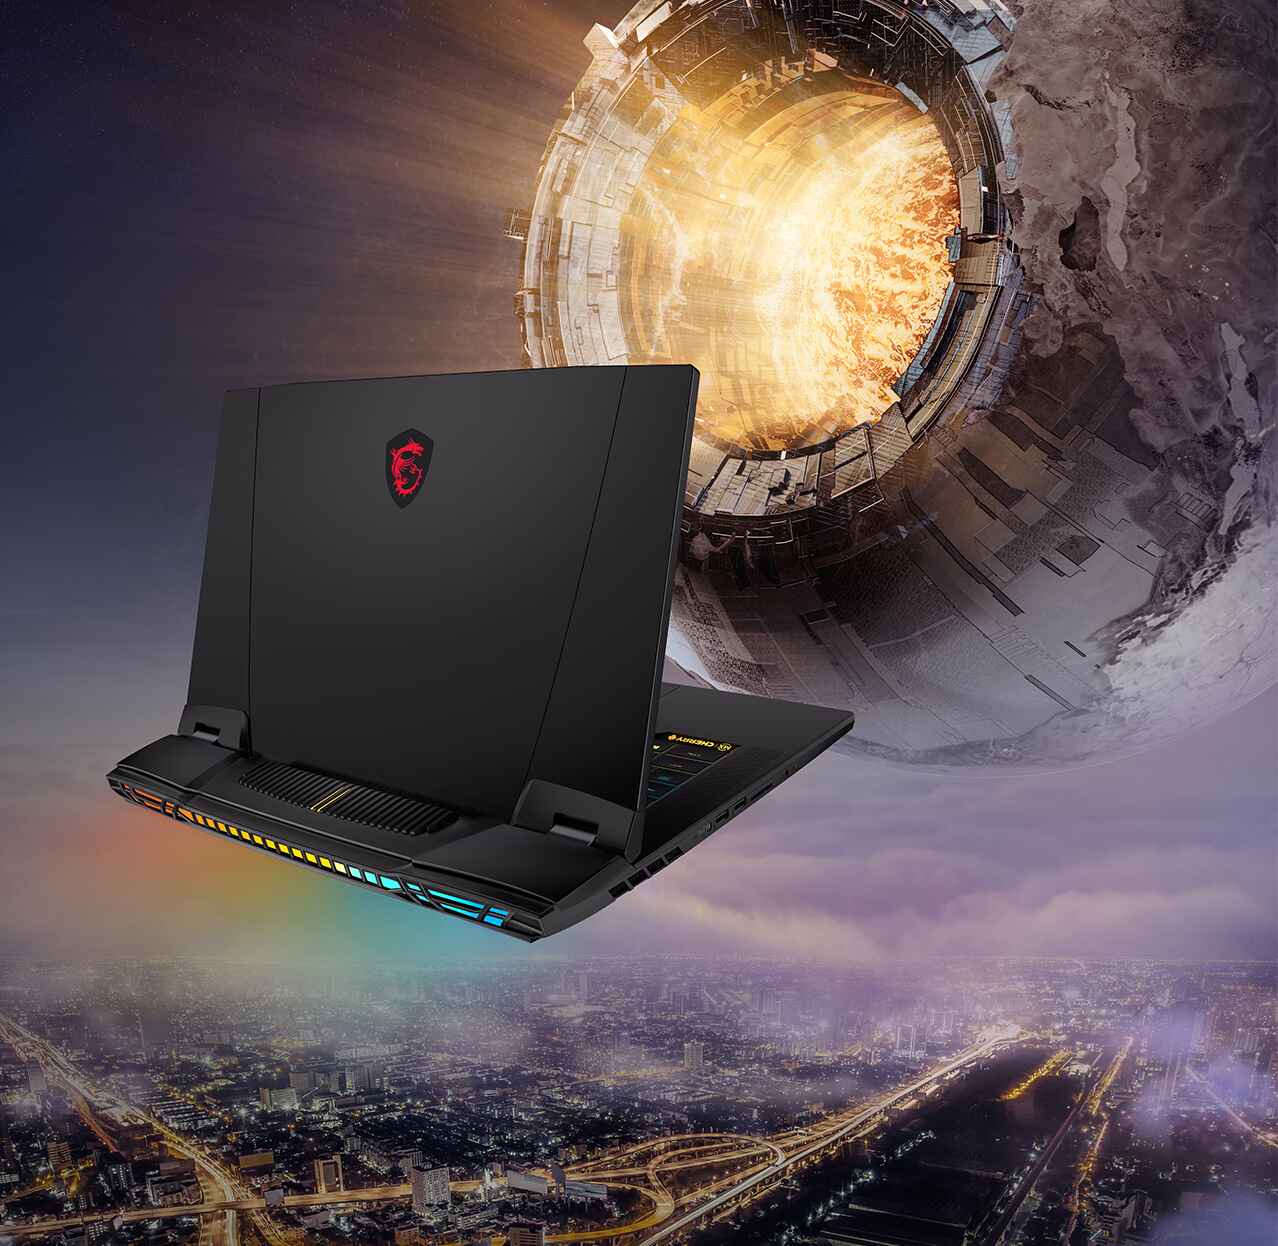 How Is MSI Gaming Laptop